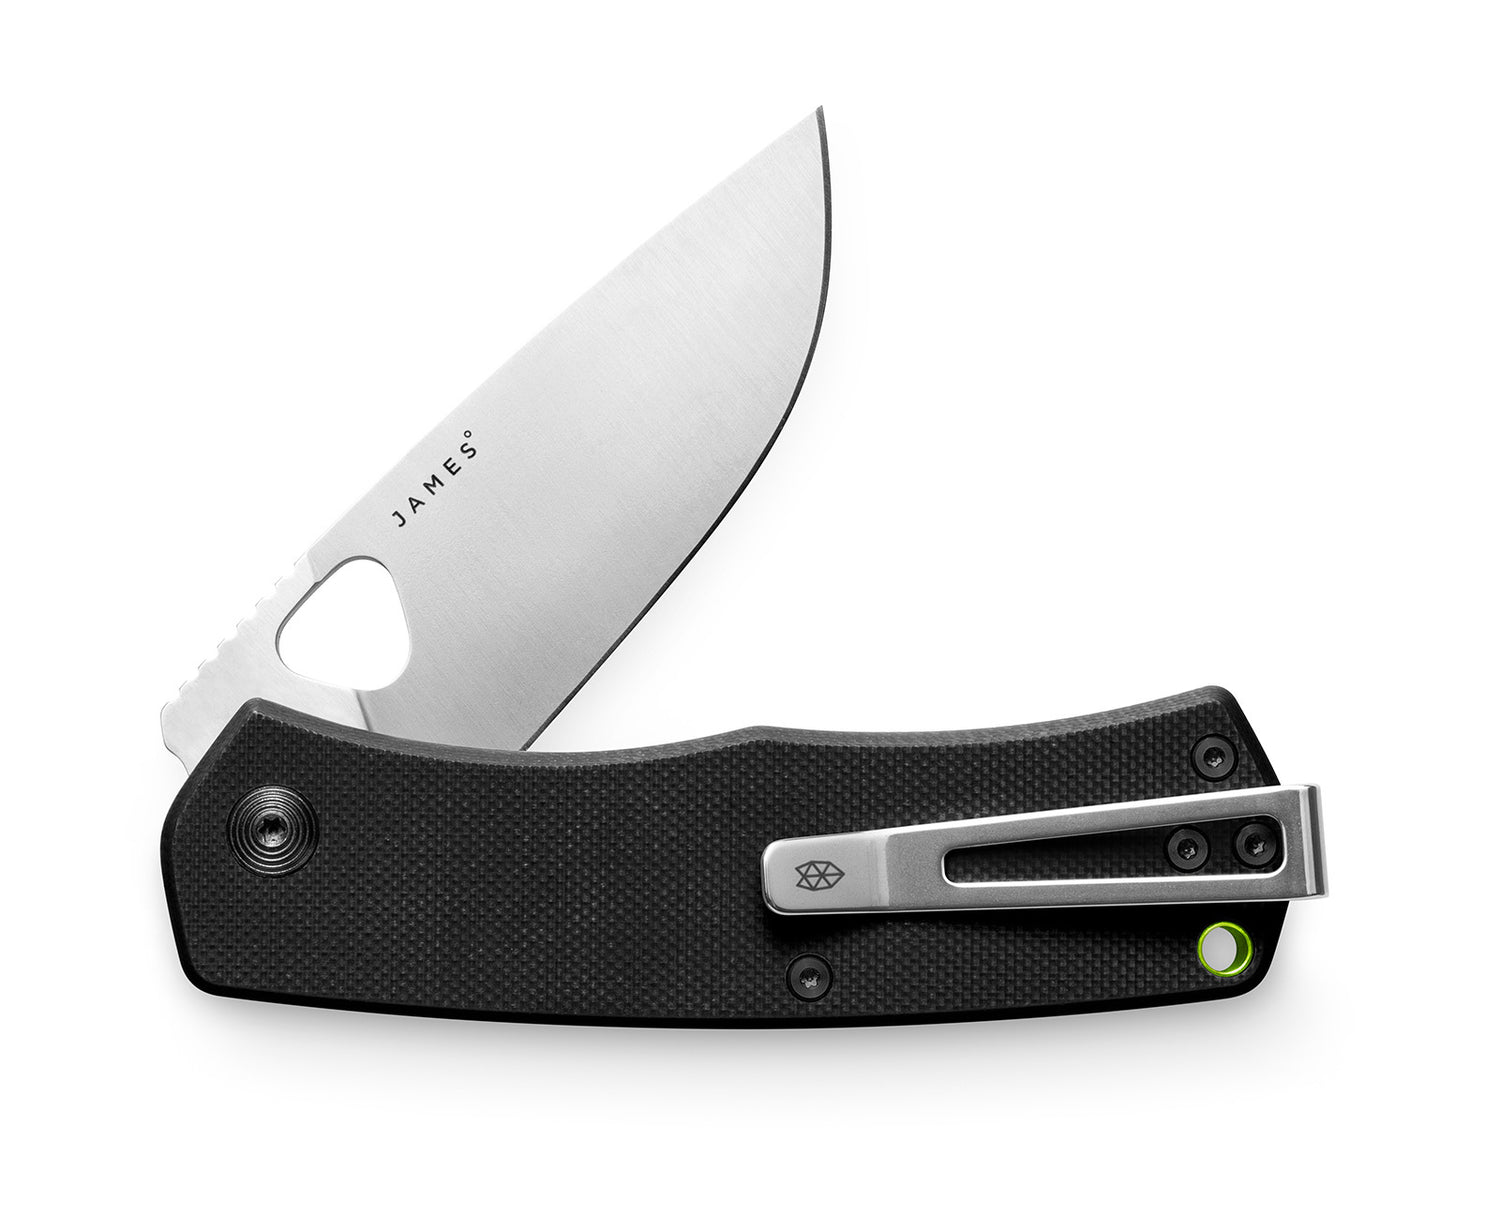 The Folsom blade with black handle and stainless steel blade.